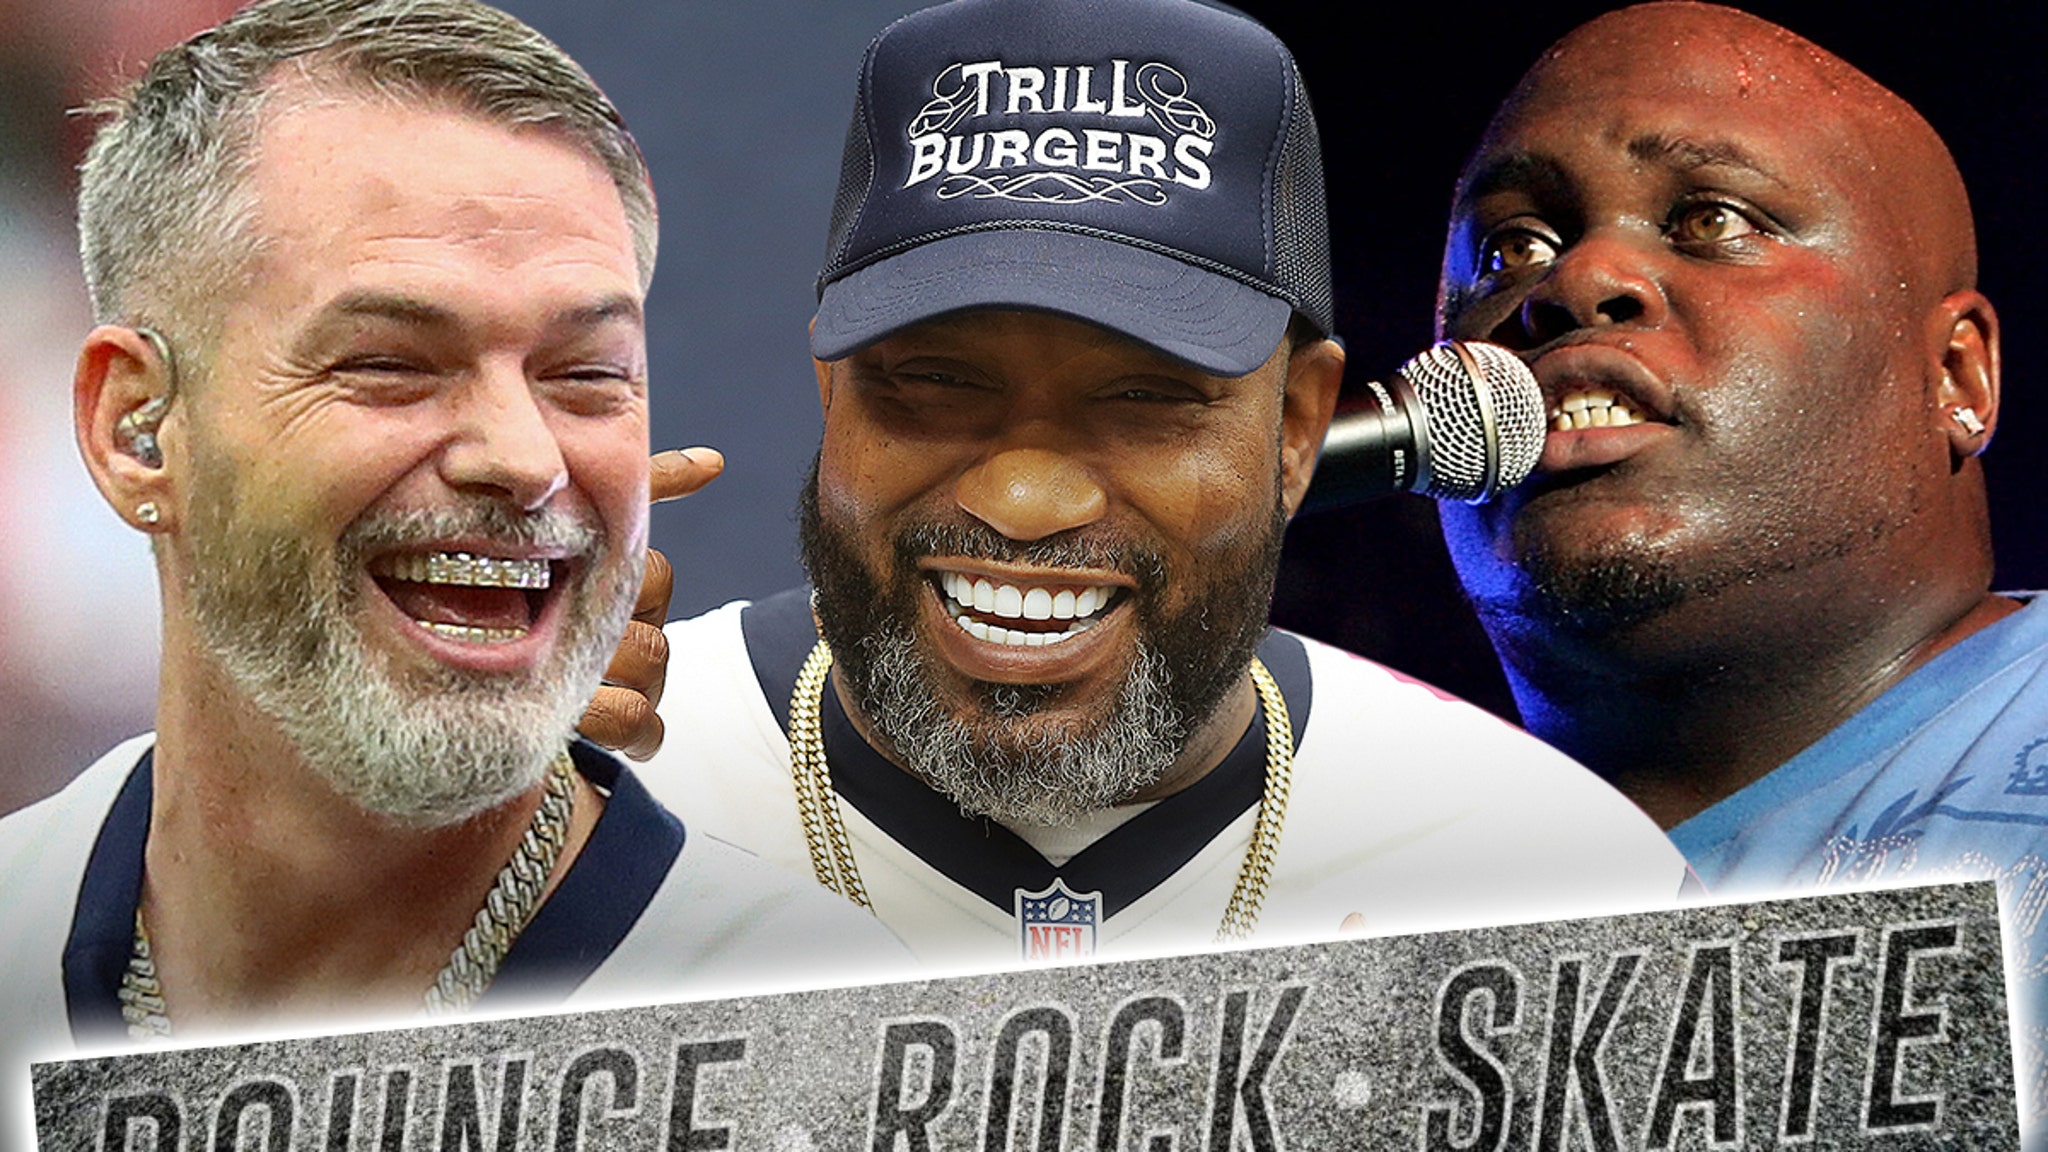 Paul Wall Drops 'Bounce, Rock, Skate' from New Album, Bun B and Chalie Boy  Feature